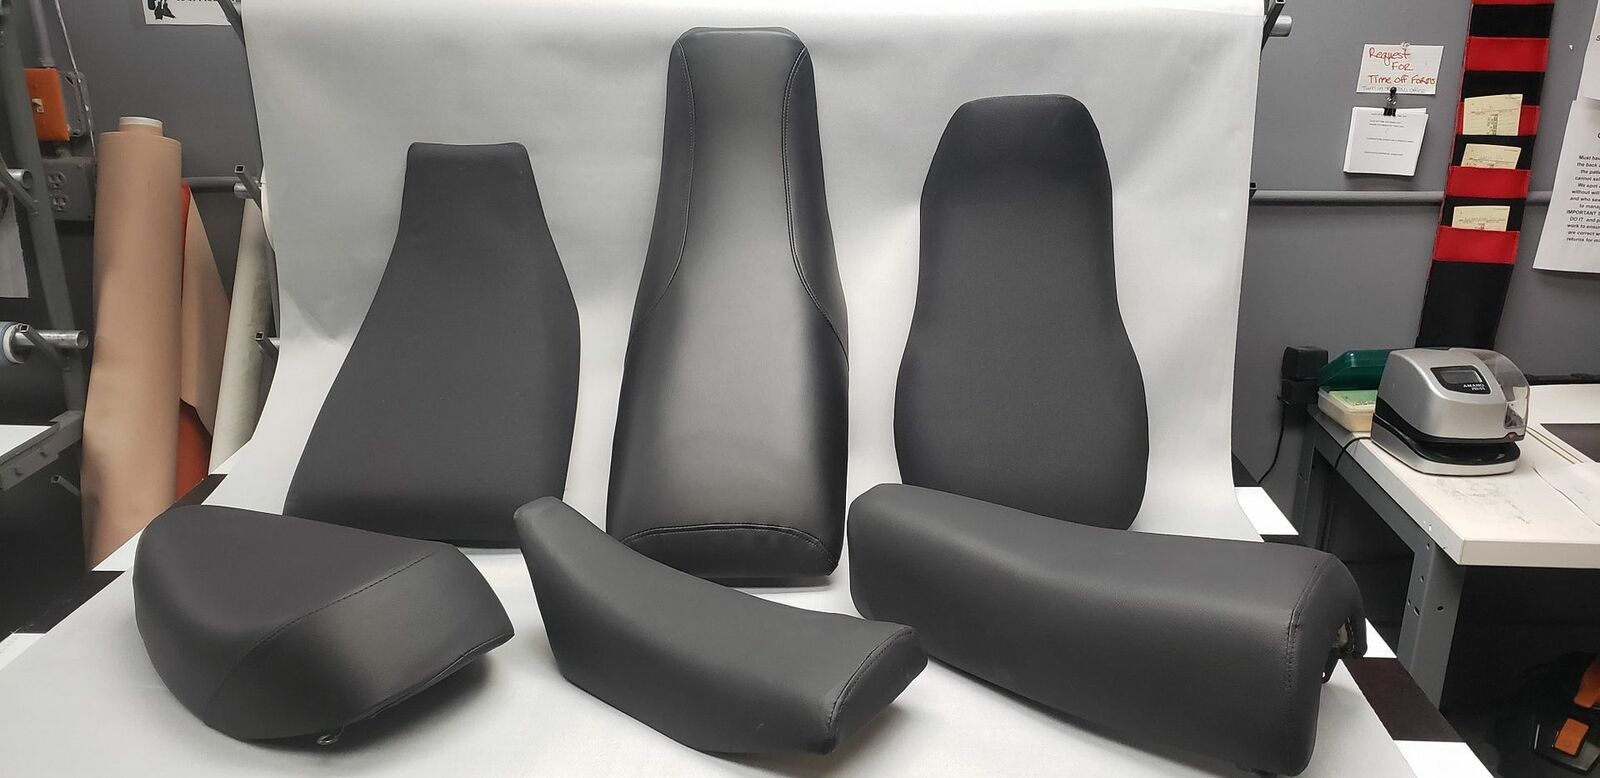 Primary image for Honda CN 250 BACKREST Seat Cover For 1992 To 1996 Models